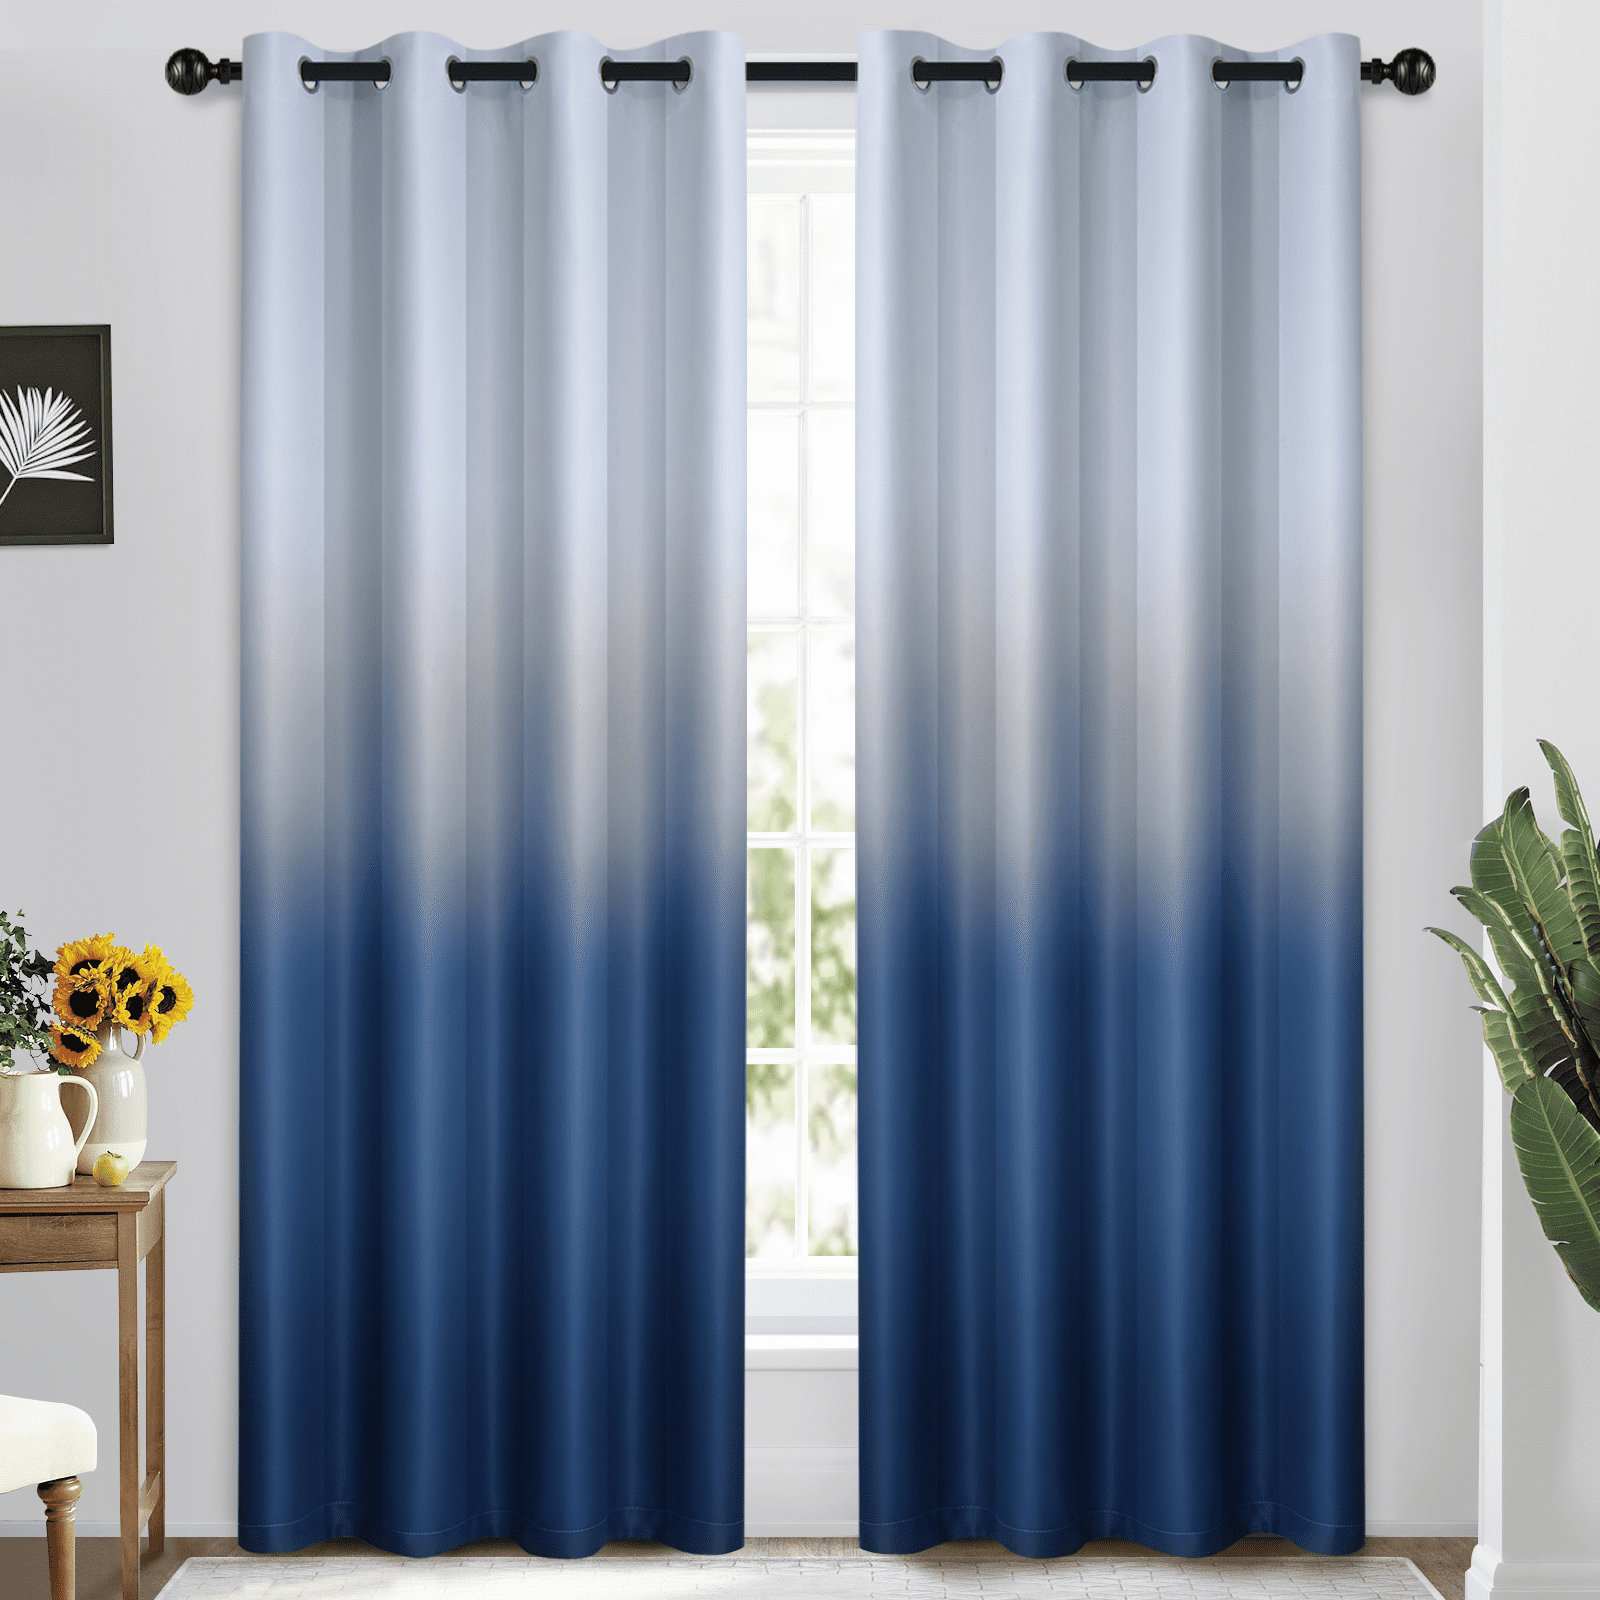 Yakamok Room Darkening Blue Ombre Blackout Curtains with Grommet Drapes for Living Room/Bedroom,2 Panels, 52x84 inches